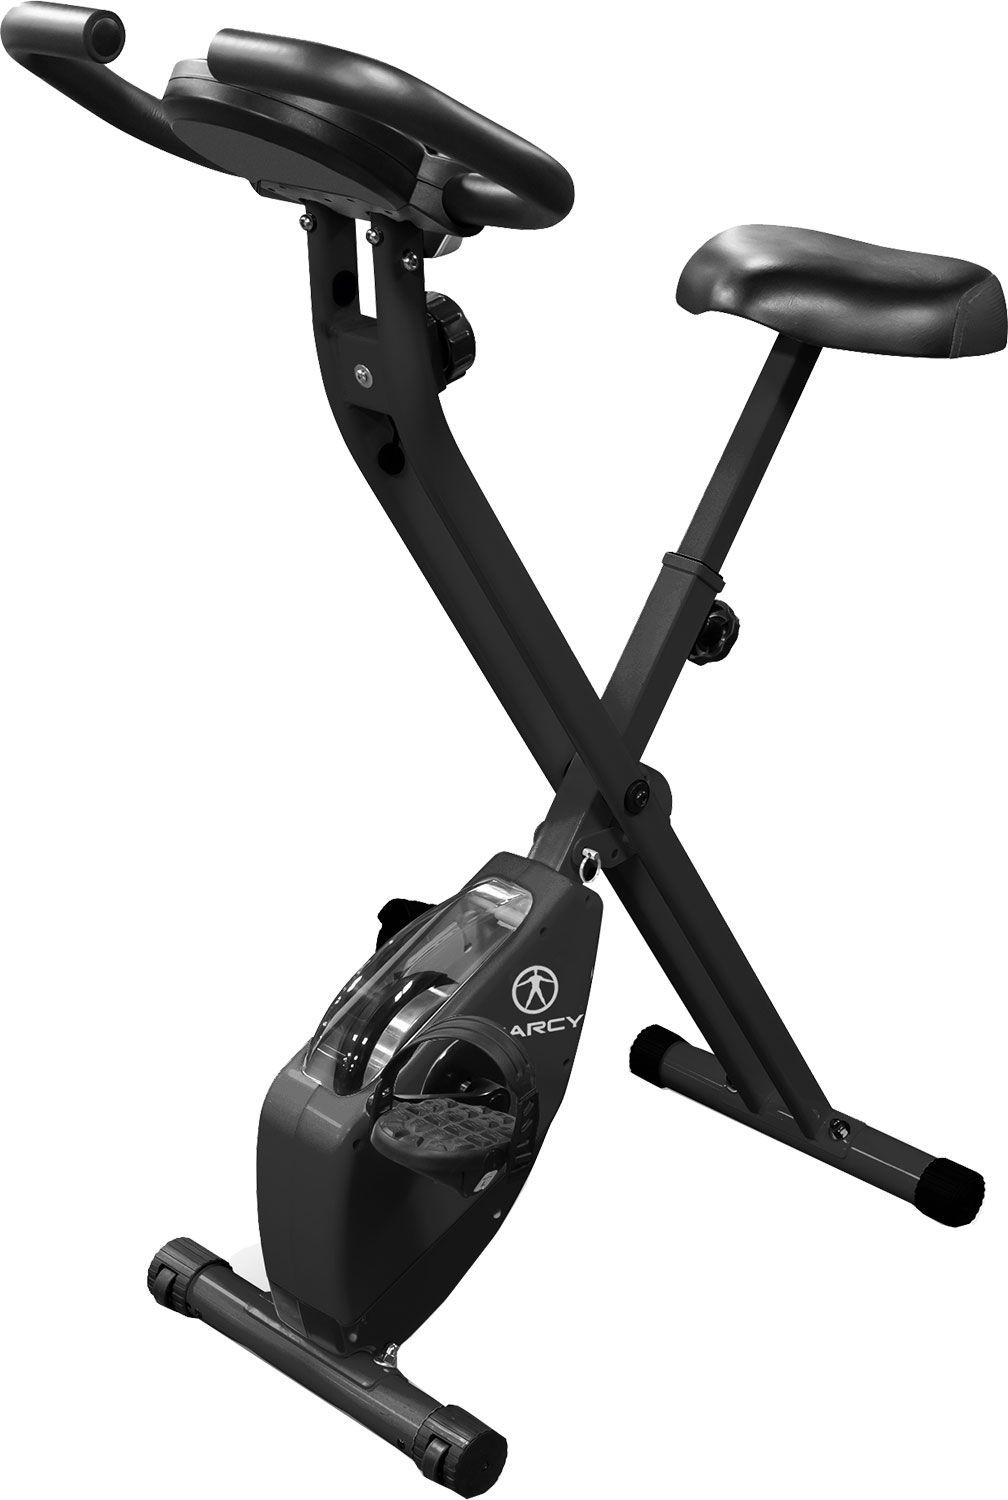 12 Best Exercise Bikes 2021 - Shop Peloton, Nordictrack And More